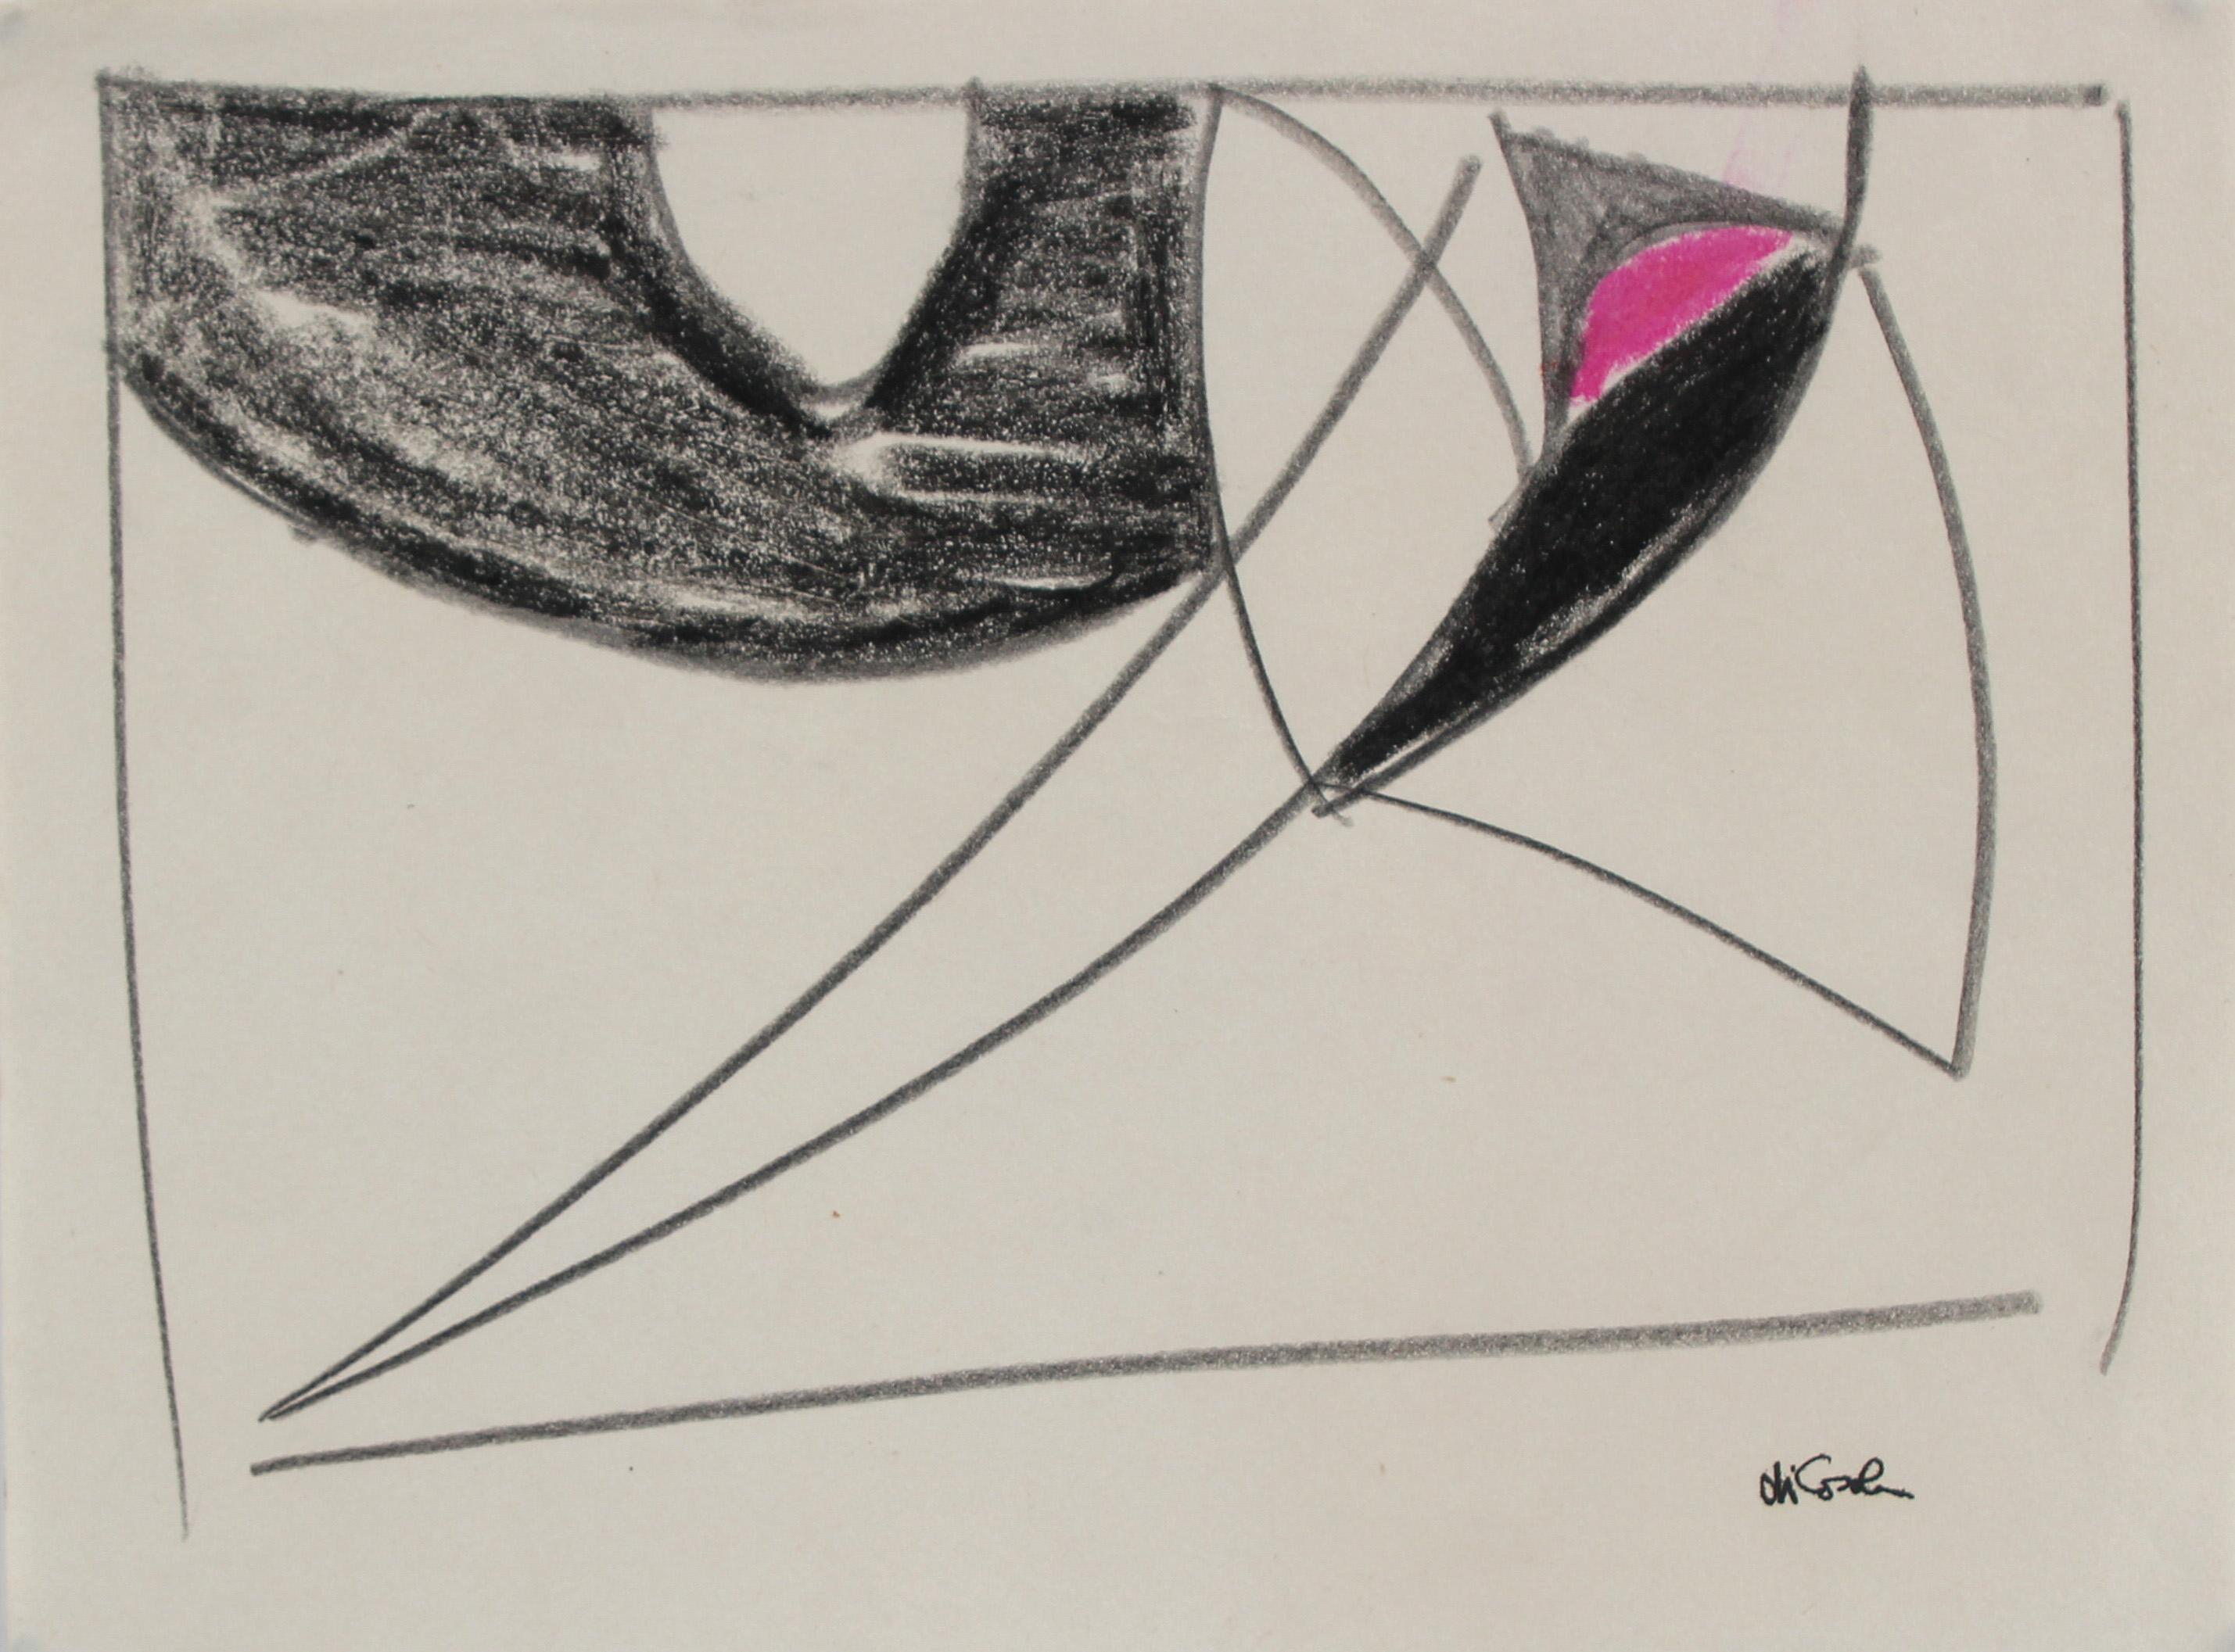 Minimalist Abstract in Pink & Black Pastel, Late 20th Century